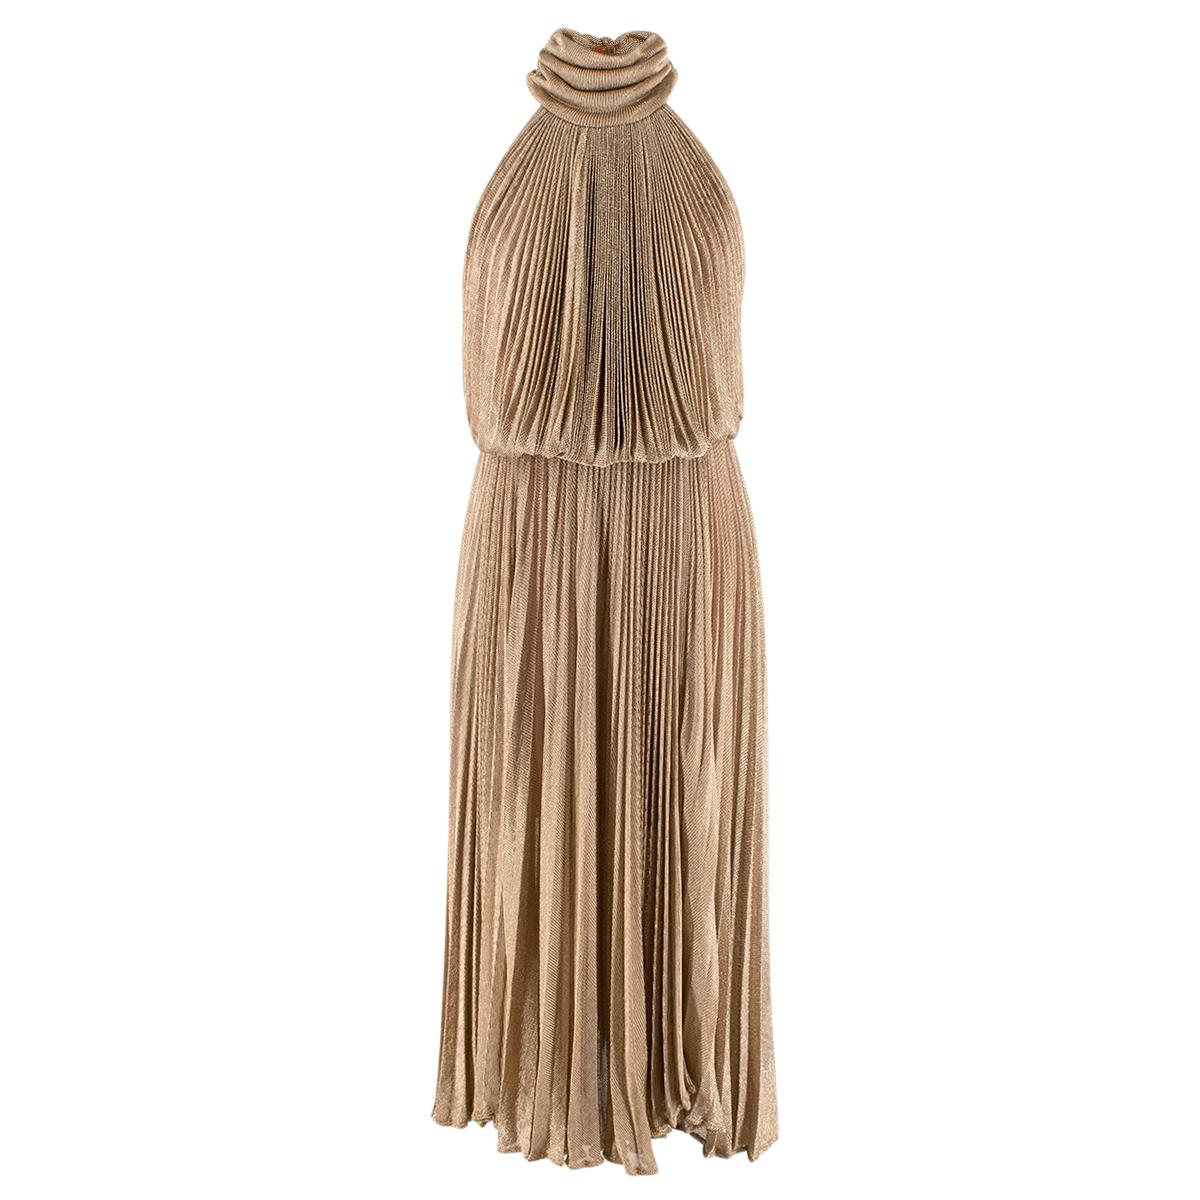 Maria Lucia Hohan Gold Lurex Knit Pleated Dress - US Size 4  For Sale